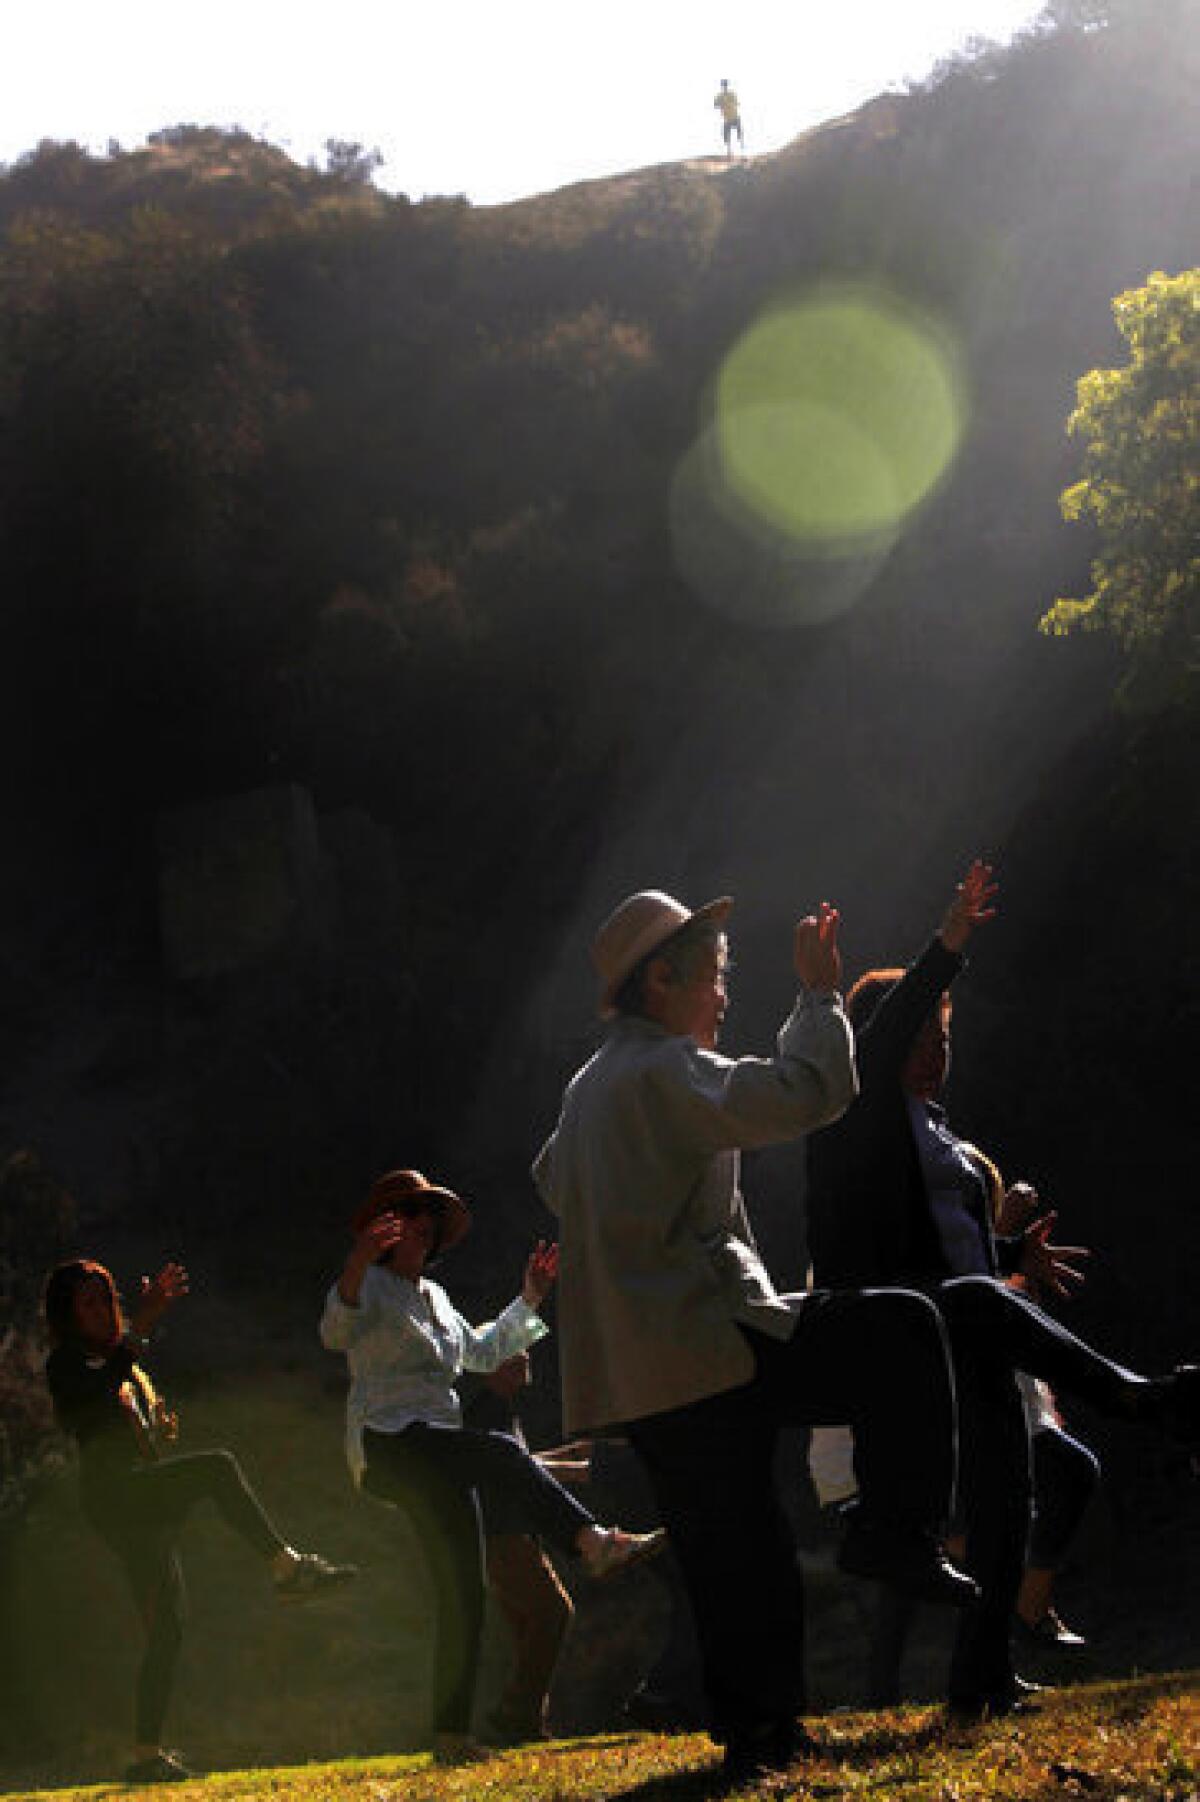 Kiki Kiko, center in hat, of Studio City, joins others to practice tai chi in Griffith Park's Bronson Canyon Park.